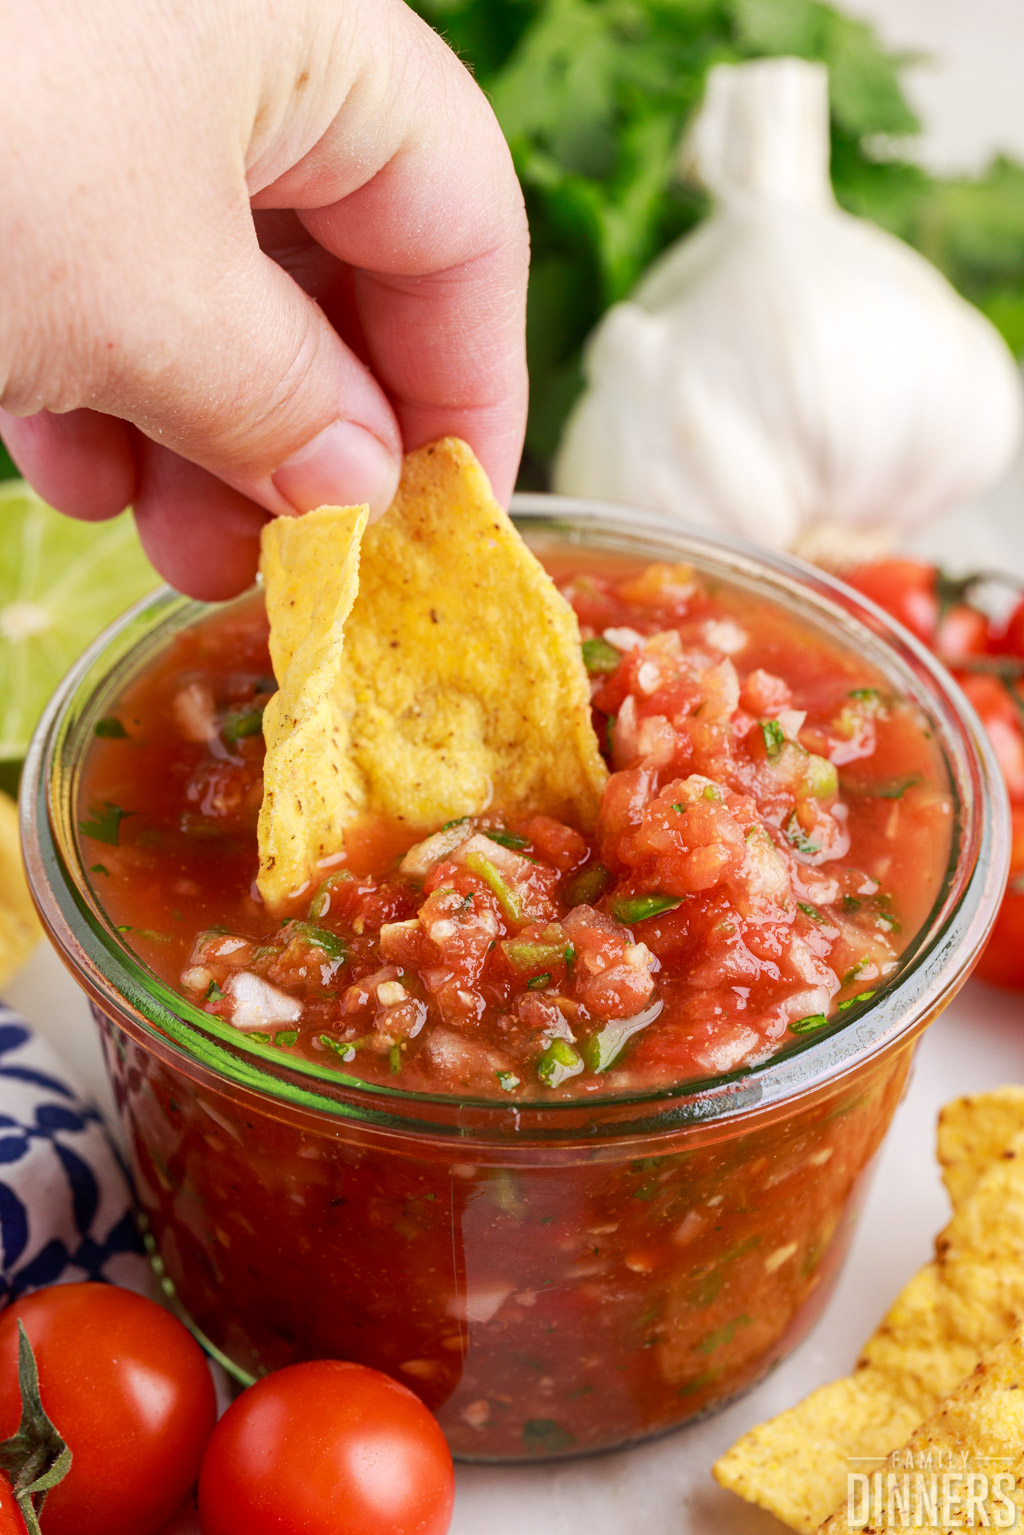 Chip dipping into the restaurant style salsa.